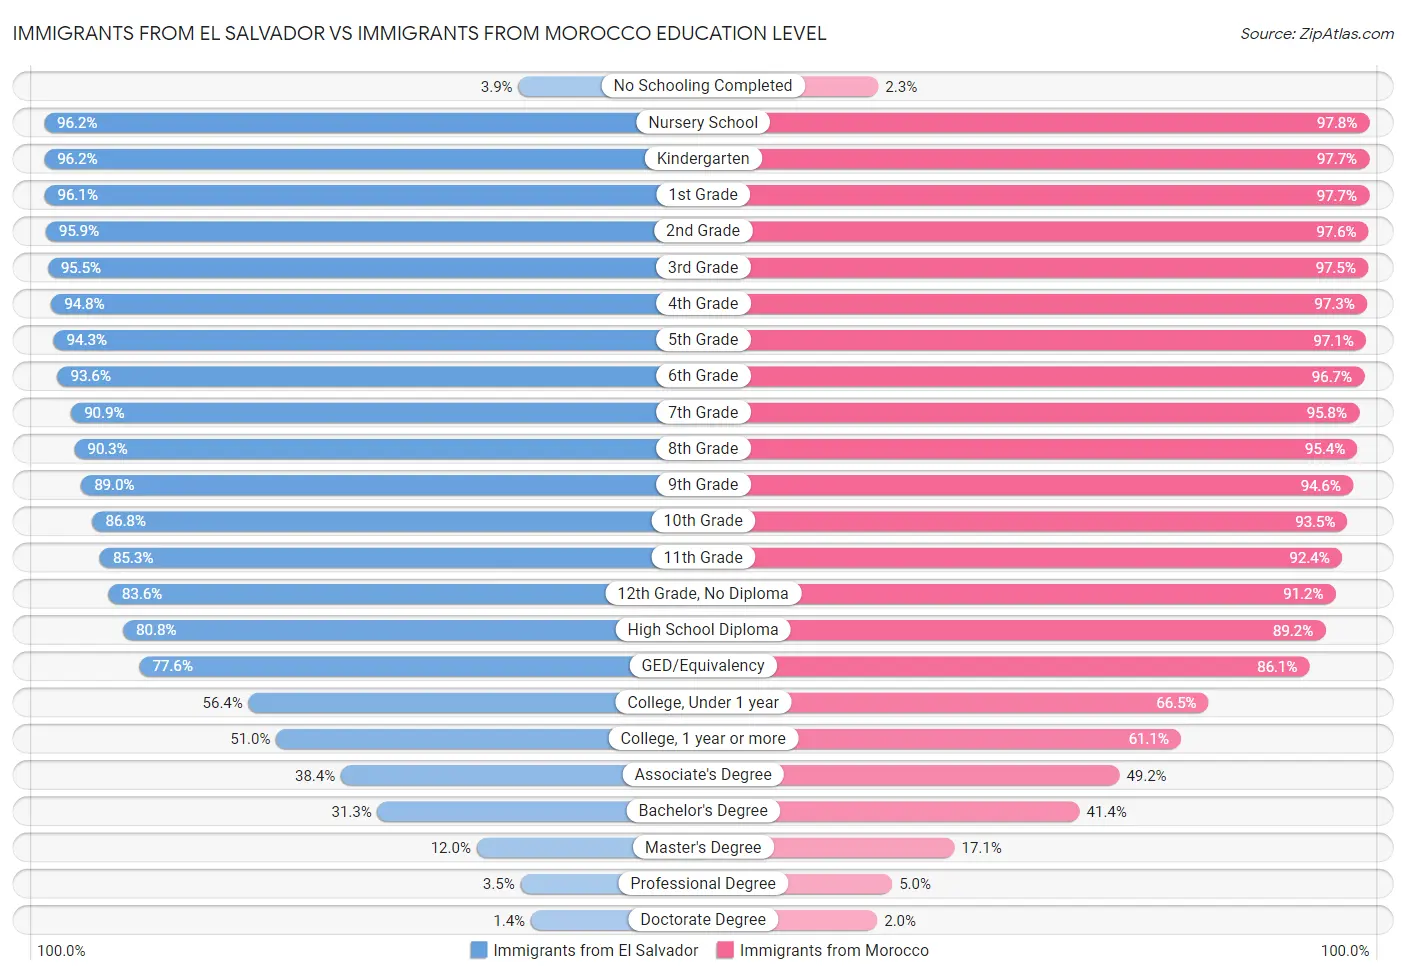 Immigrants from El Salvador vs Immigrants from Morocco Education Level